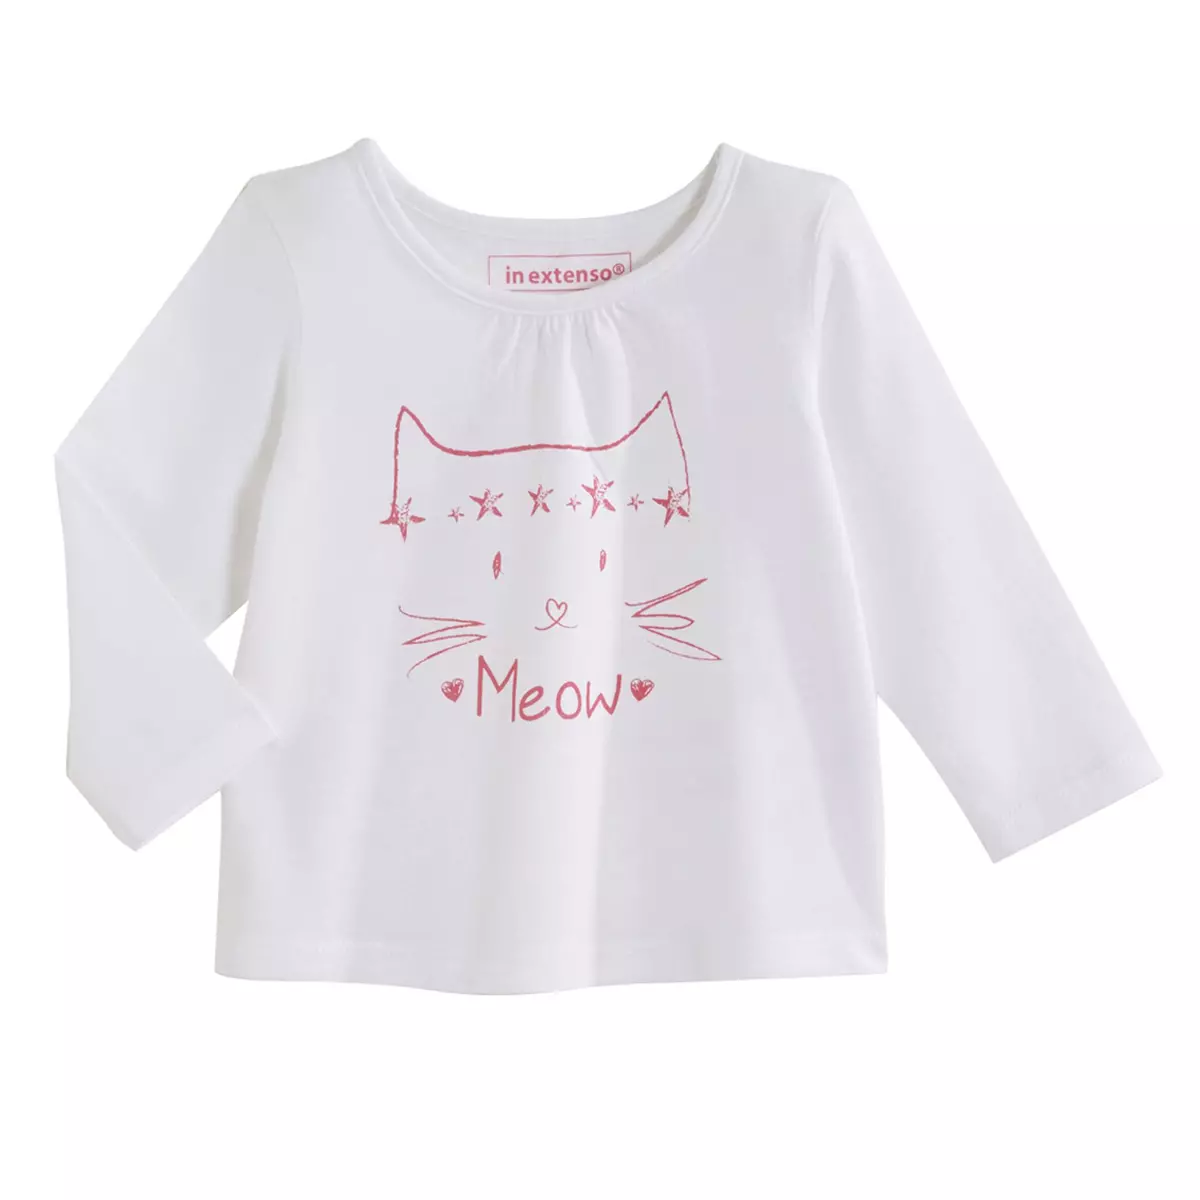 IN EXTENSO Tee-shirt chat manches longues bébé fille